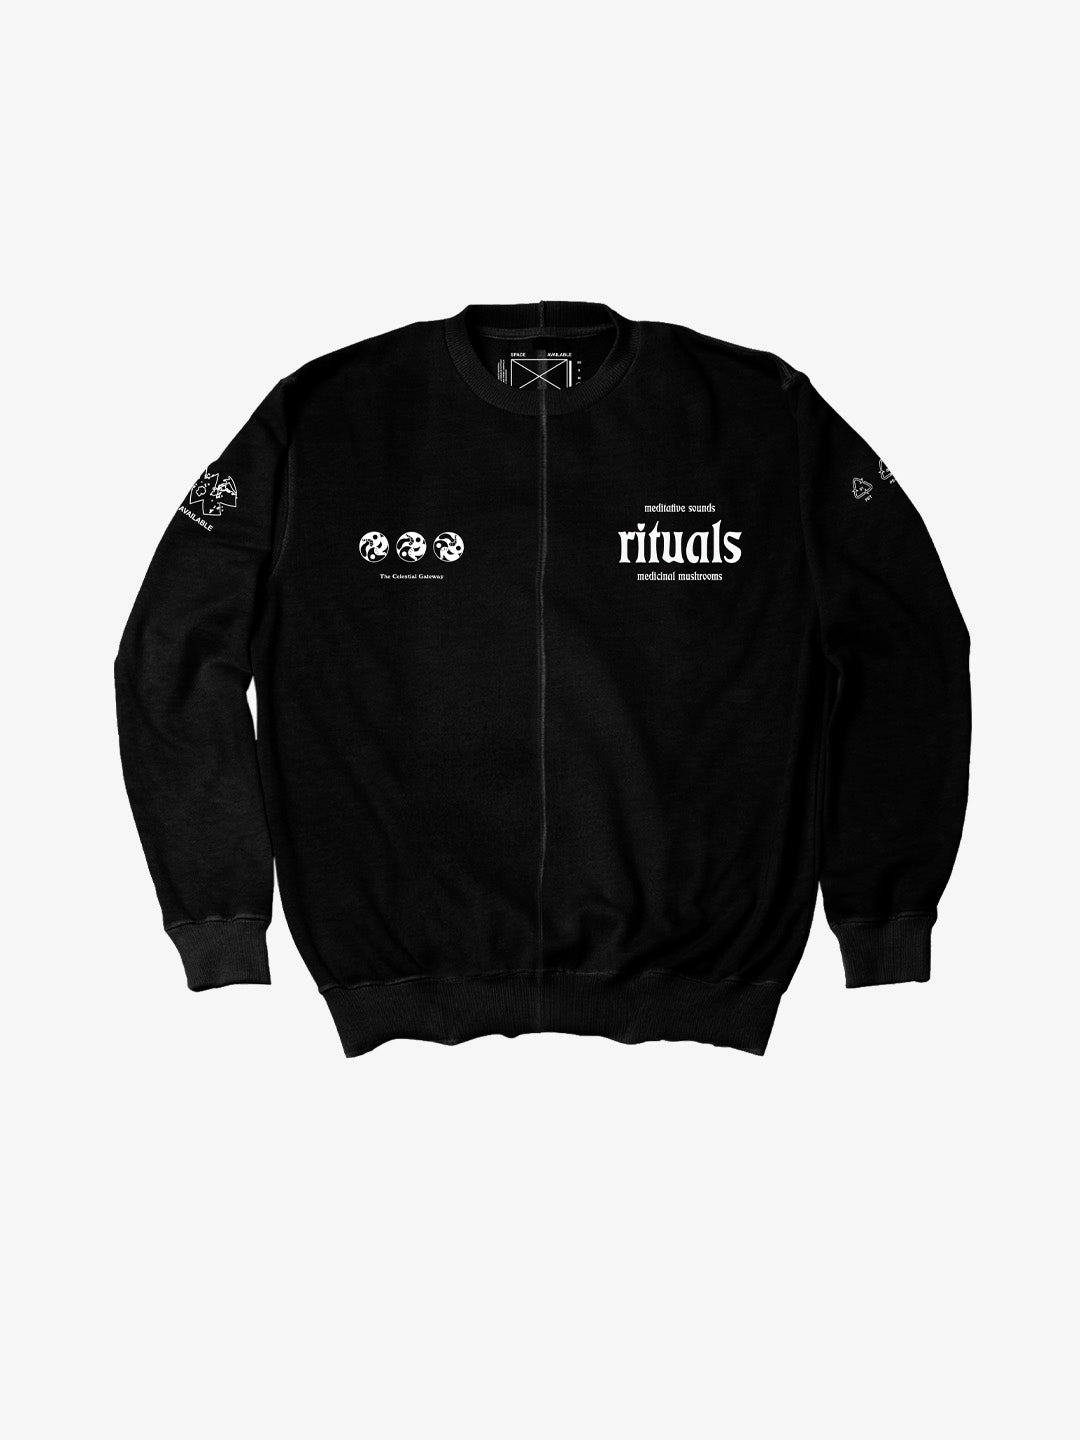 Upcycled Rituals Black